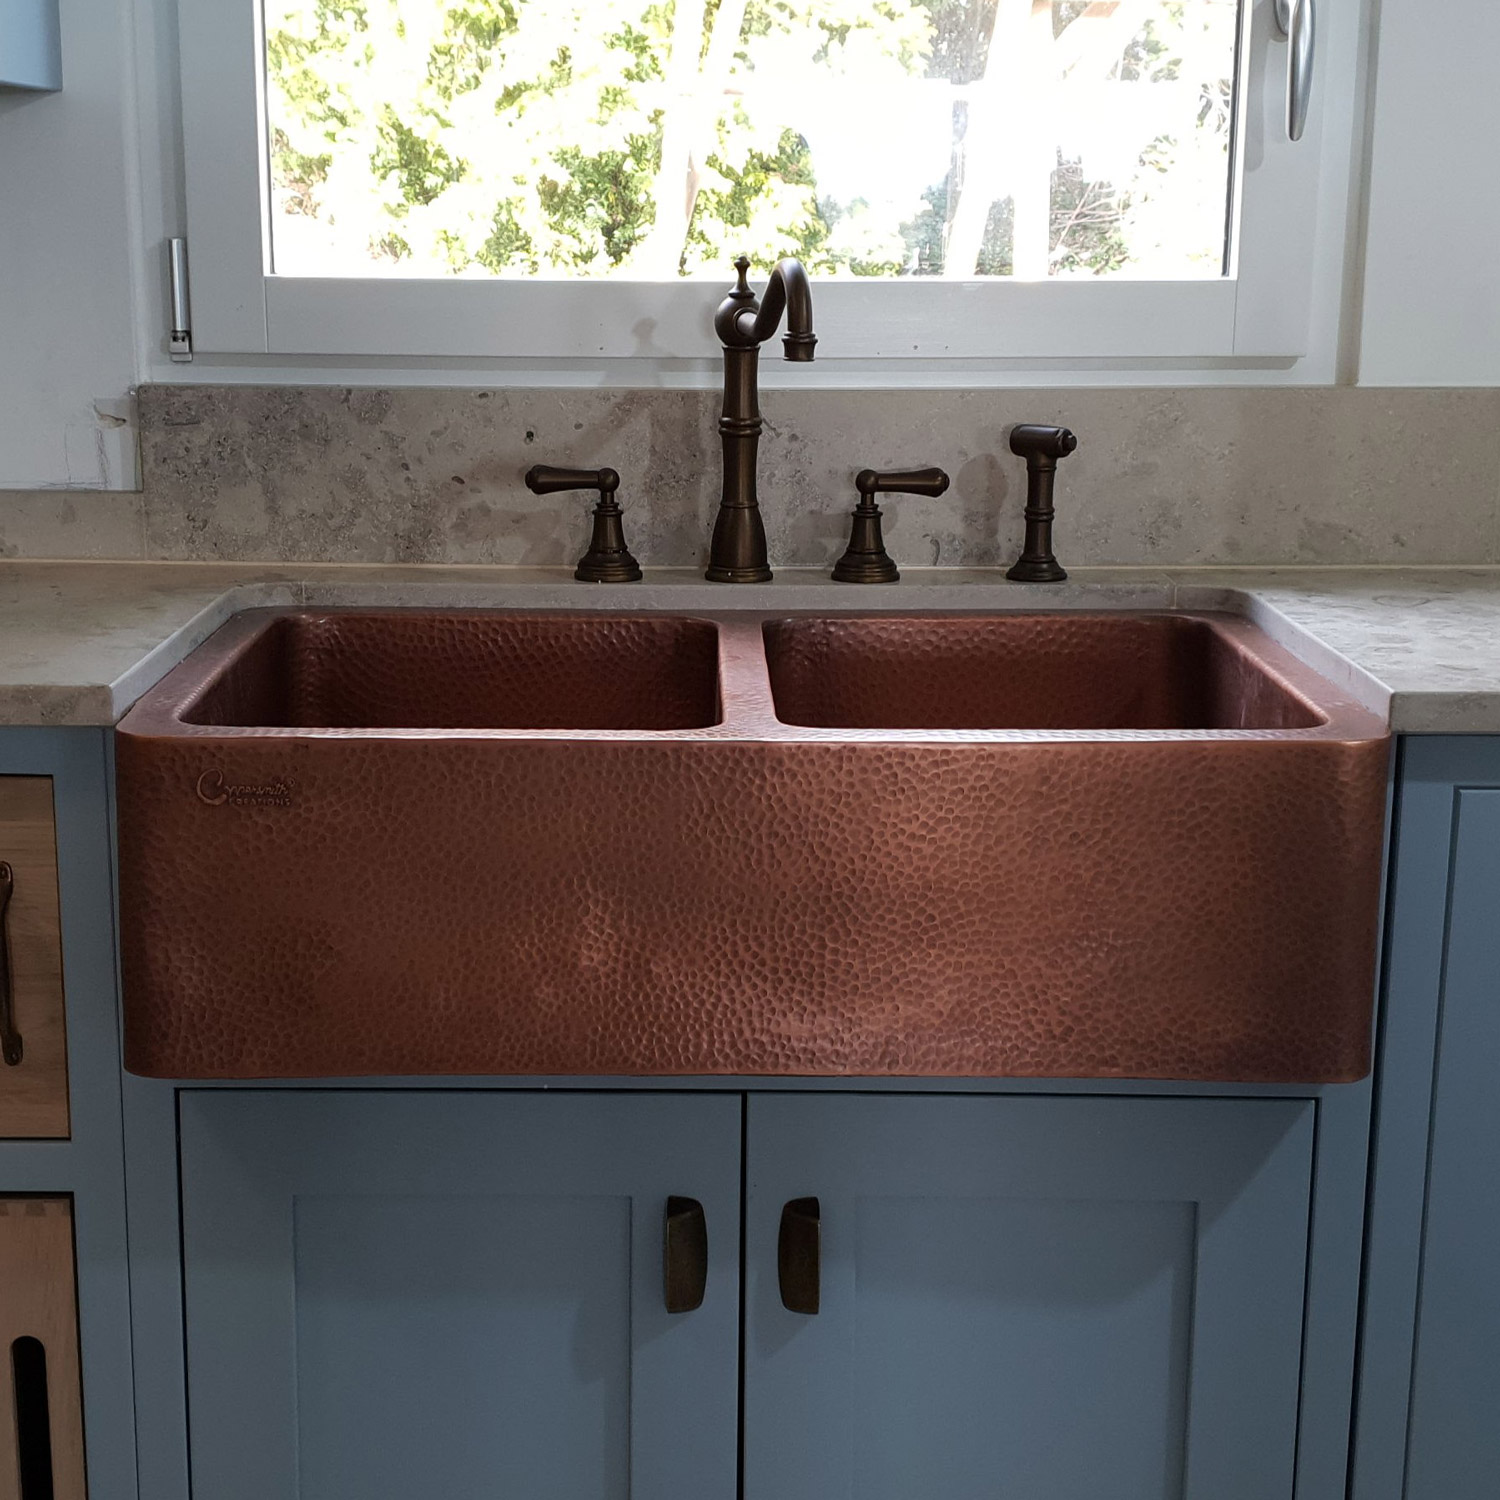 large copper sink with two bowls installed in a rustic kitchen